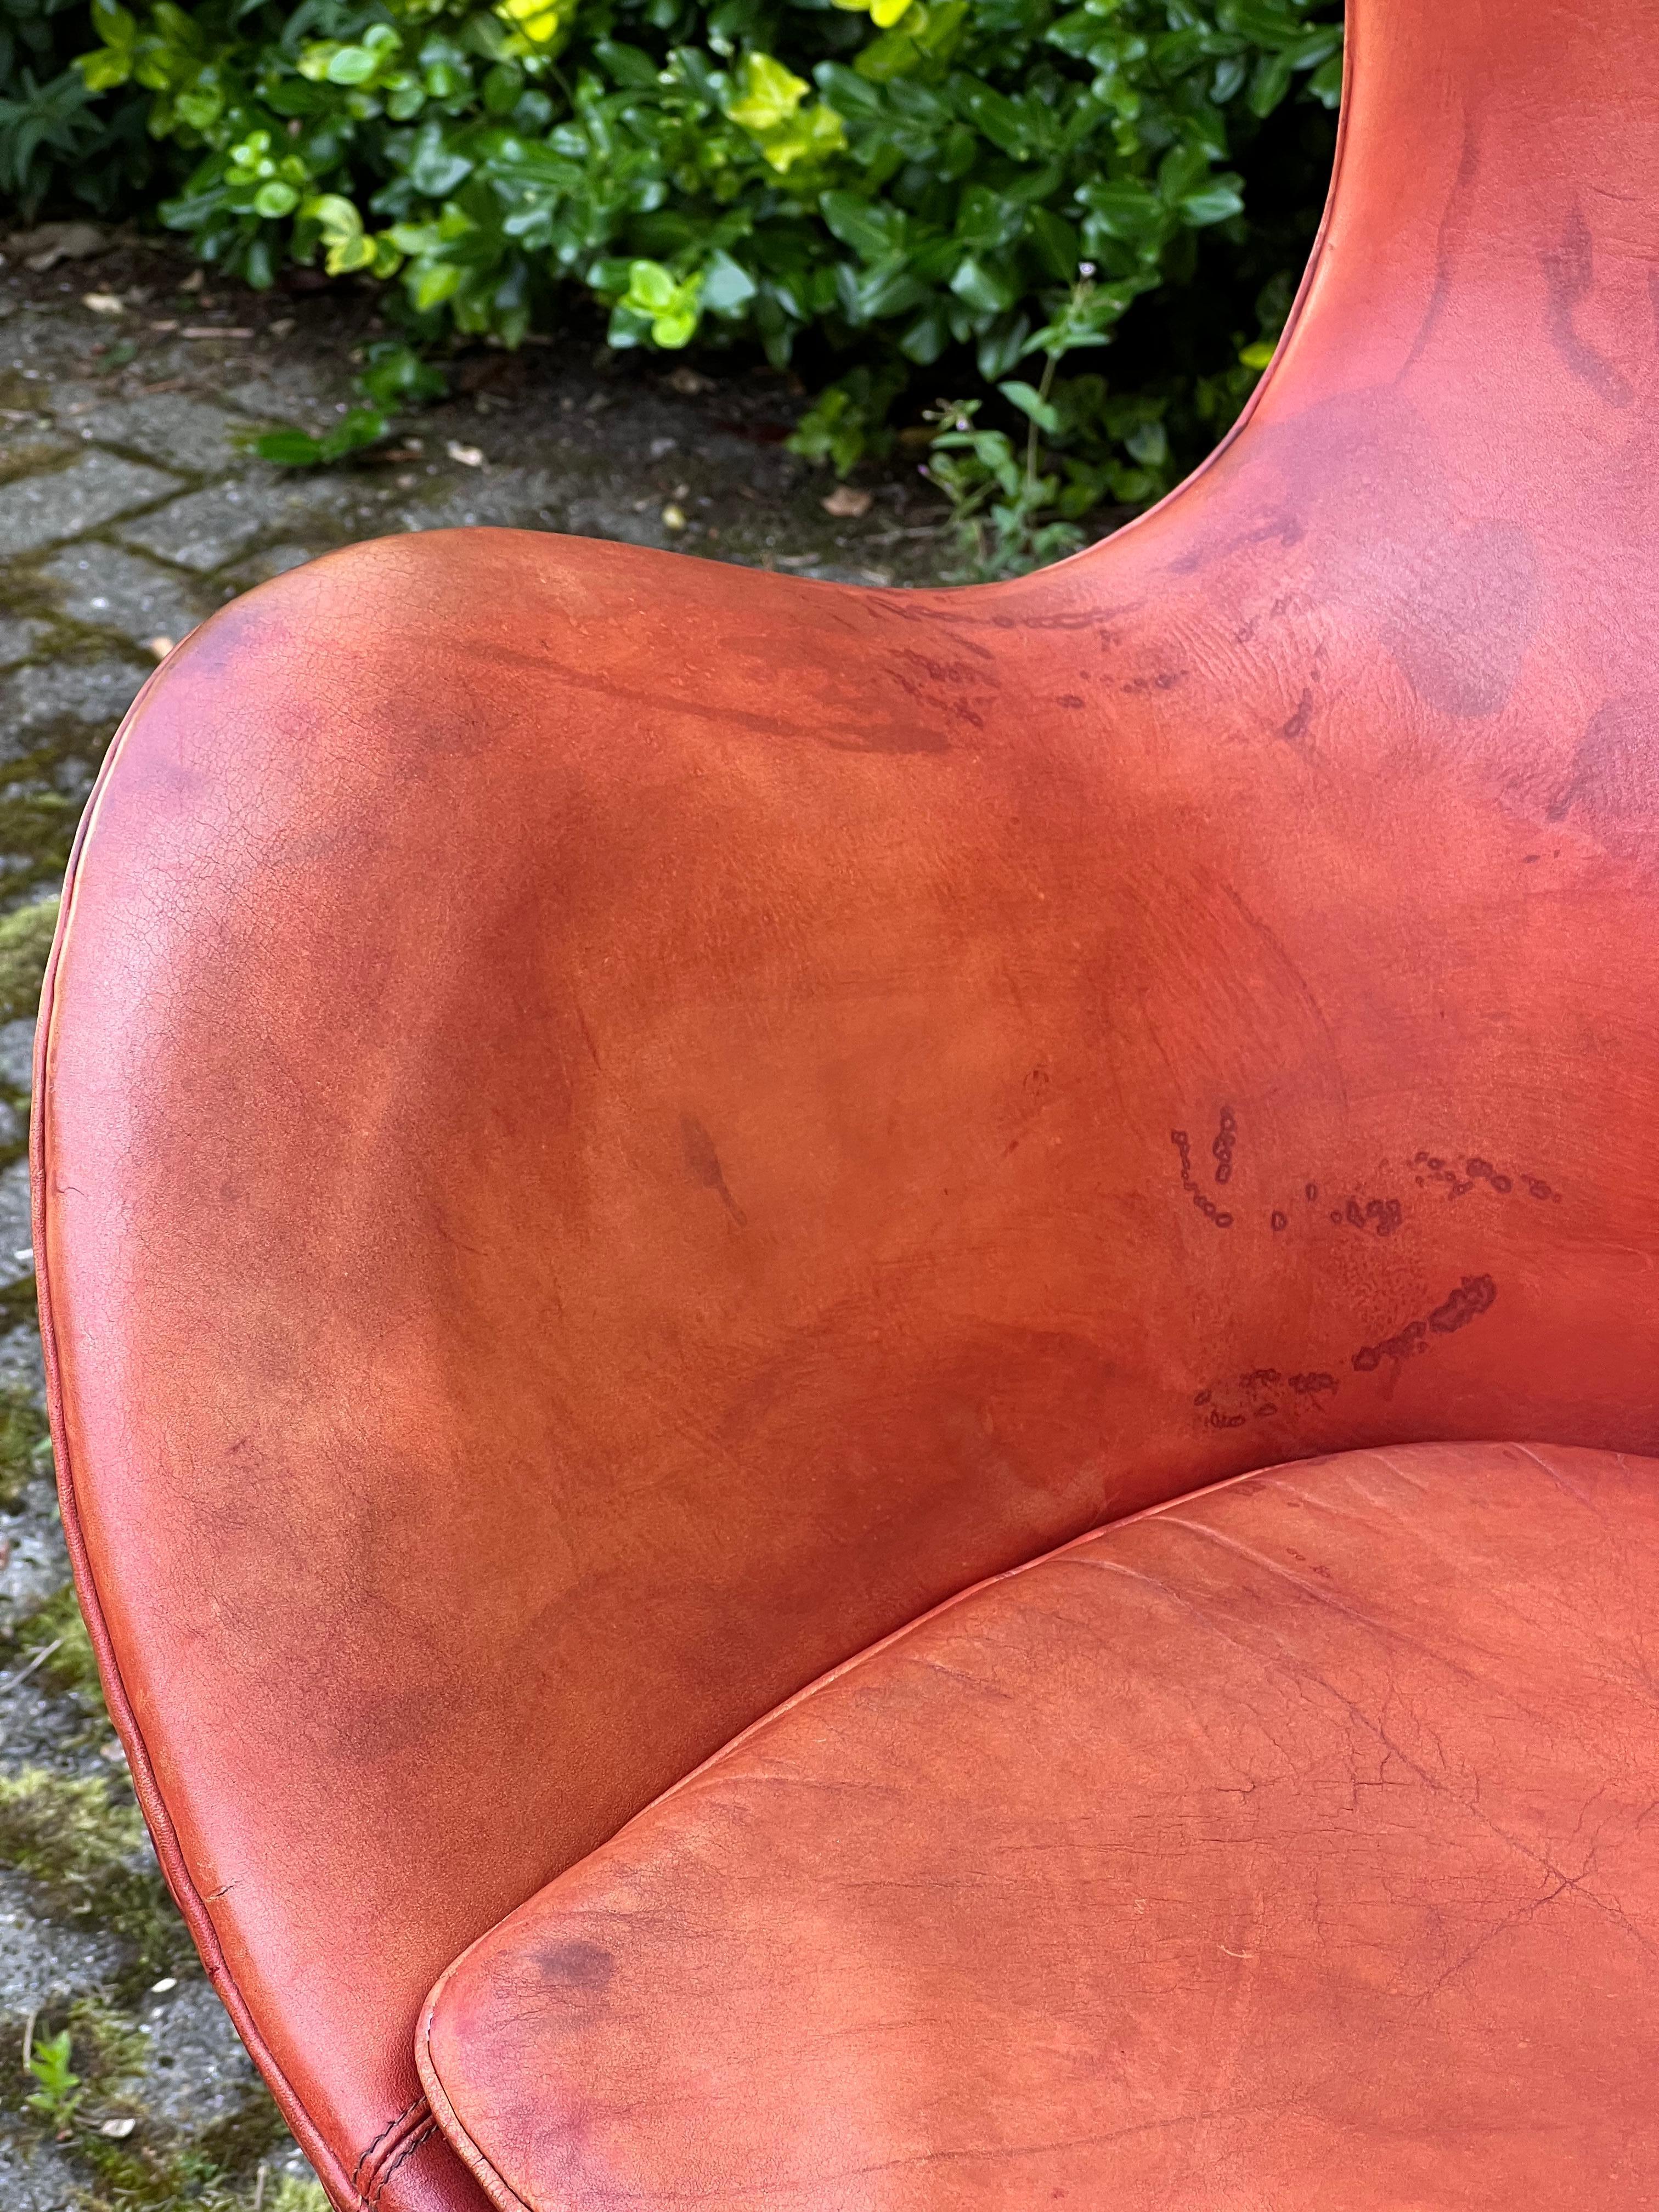 Mid-20th Century Arne Jacobsen Iconic Egg Chair Cognac Leather Early 60s Original Fritz Hansen For Sale